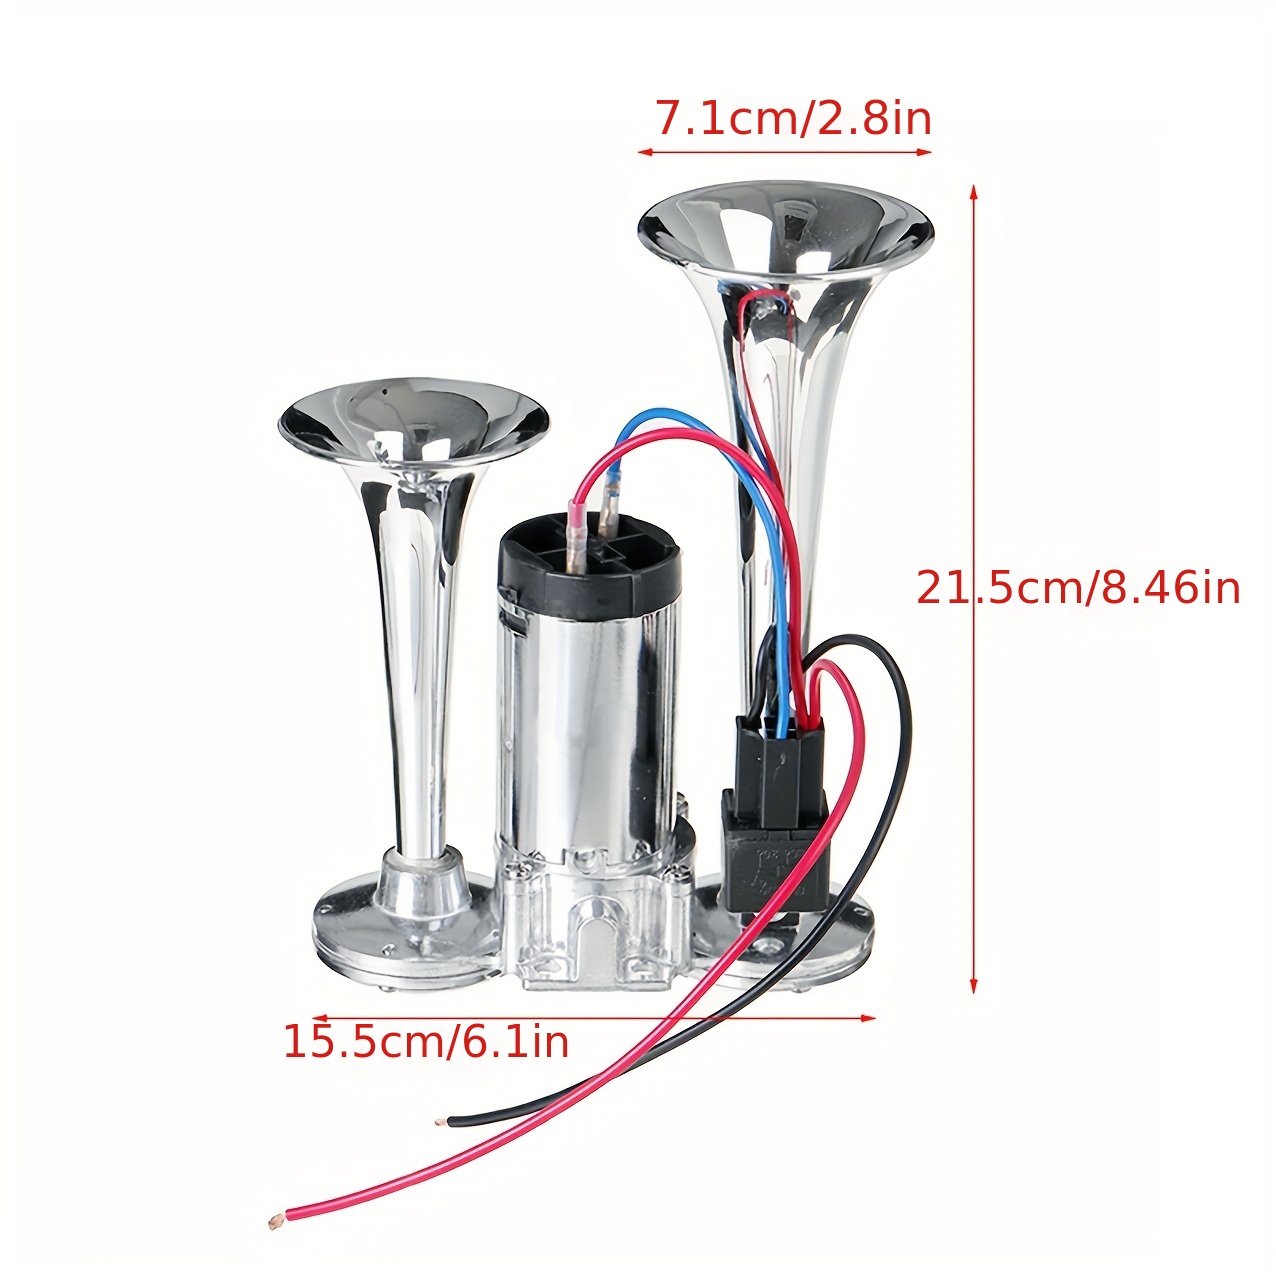 12V 300dB 4 Trumpet Super Loud Air Horn Compressor With Mounting Kits Car  Loud Train Horn for Truck Electric Snail Horn